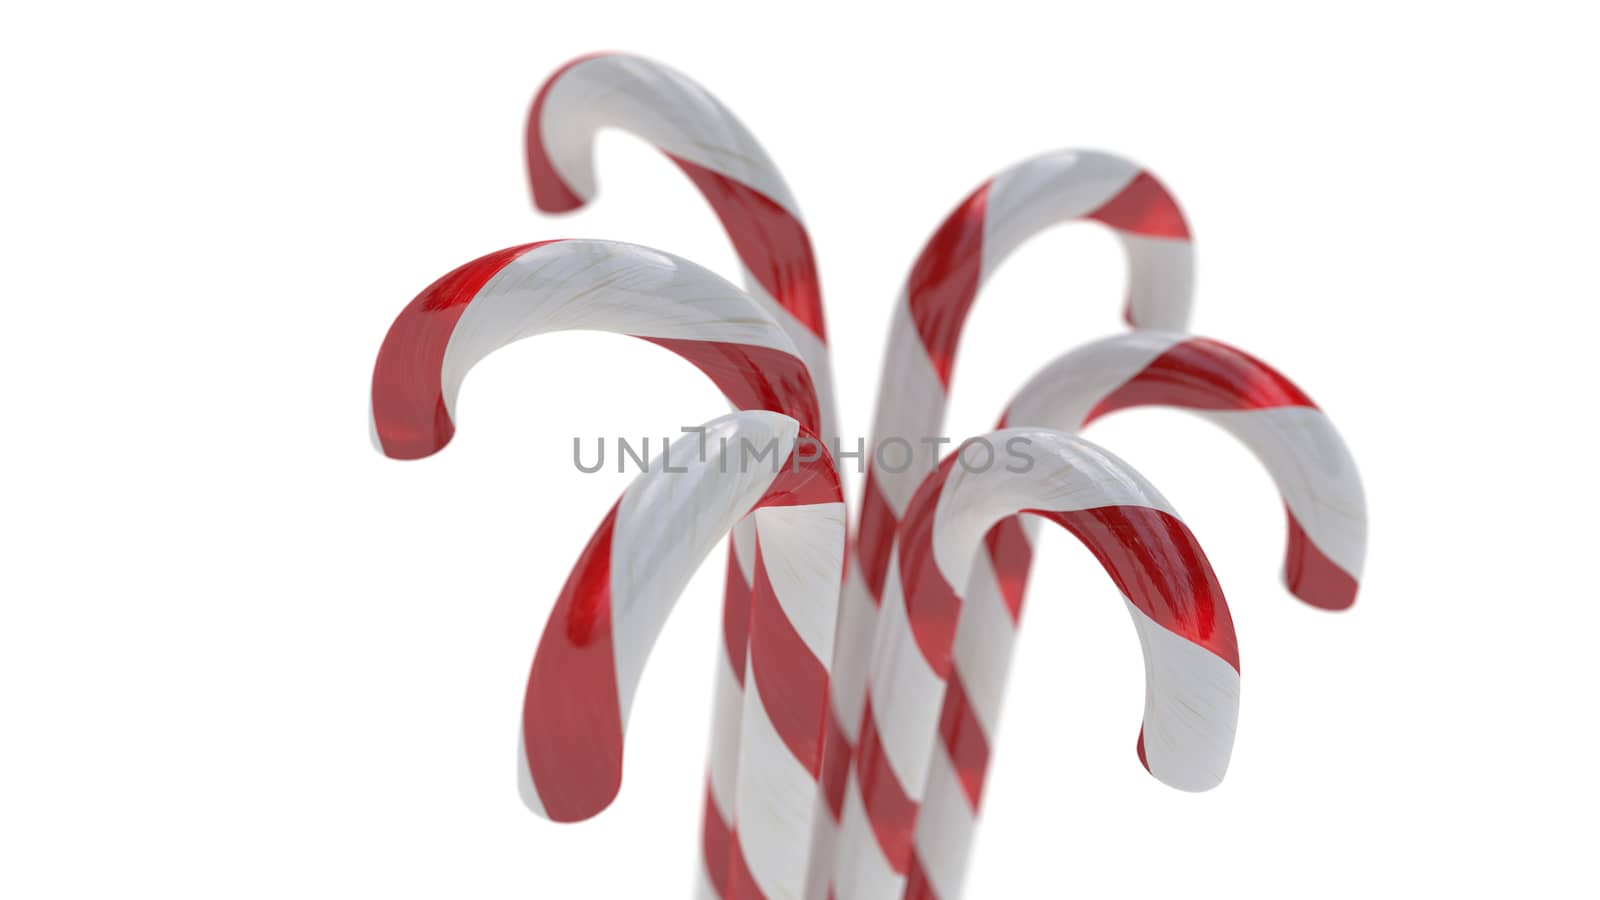 Candy Canes with selective focus on White Background, Christmas Decoration